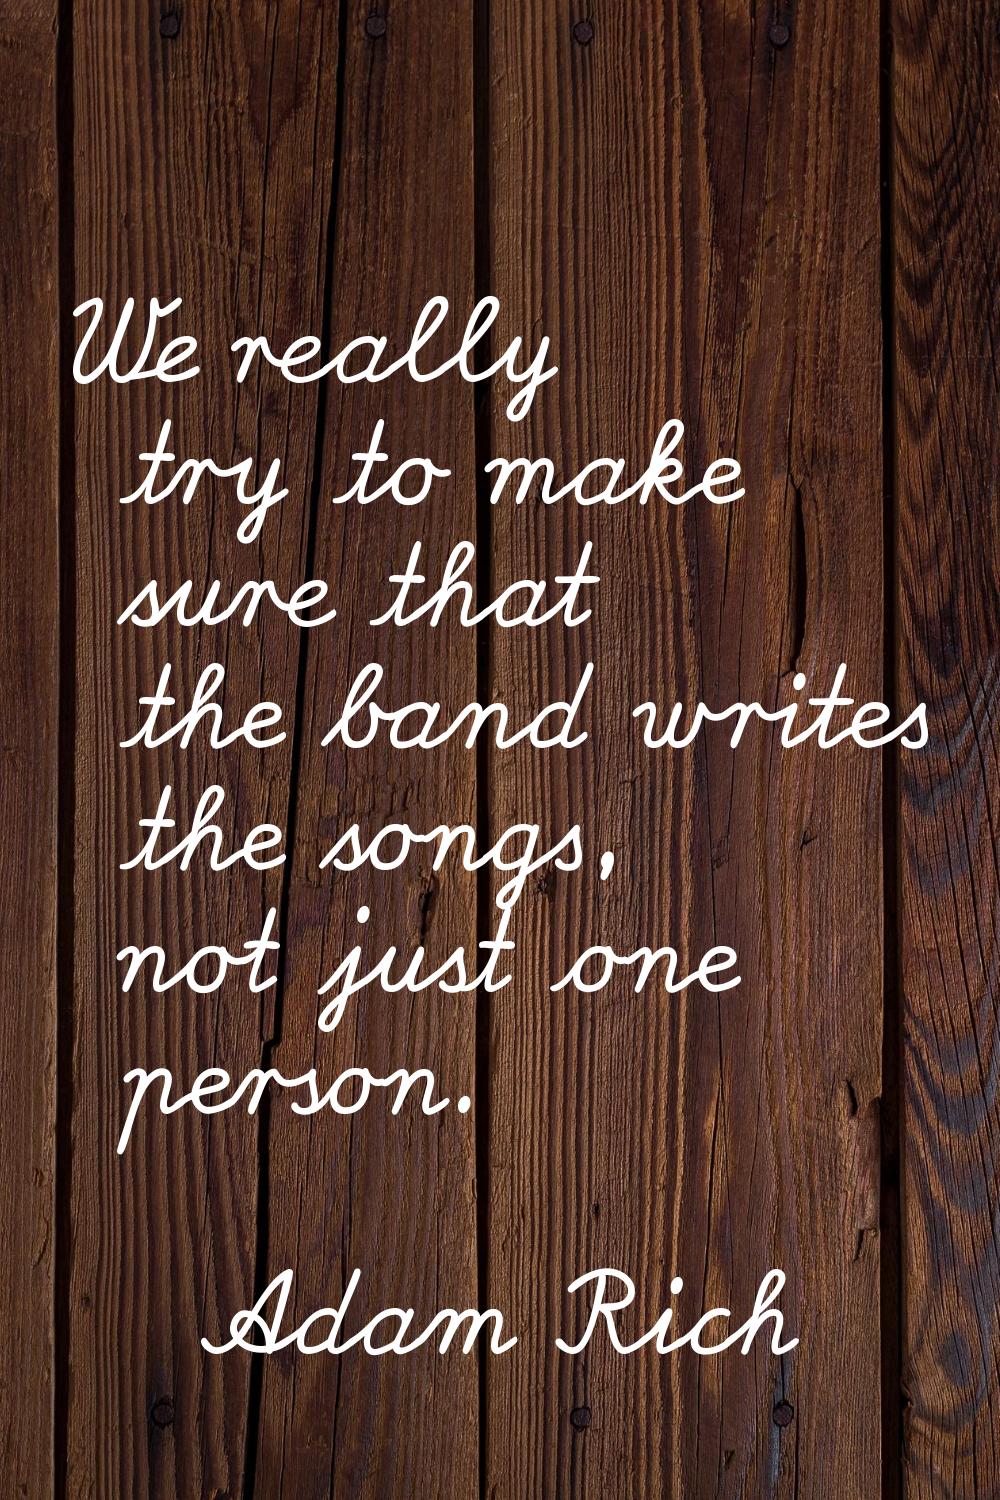 We really try to make sure that the band writes the songs, not just one person.